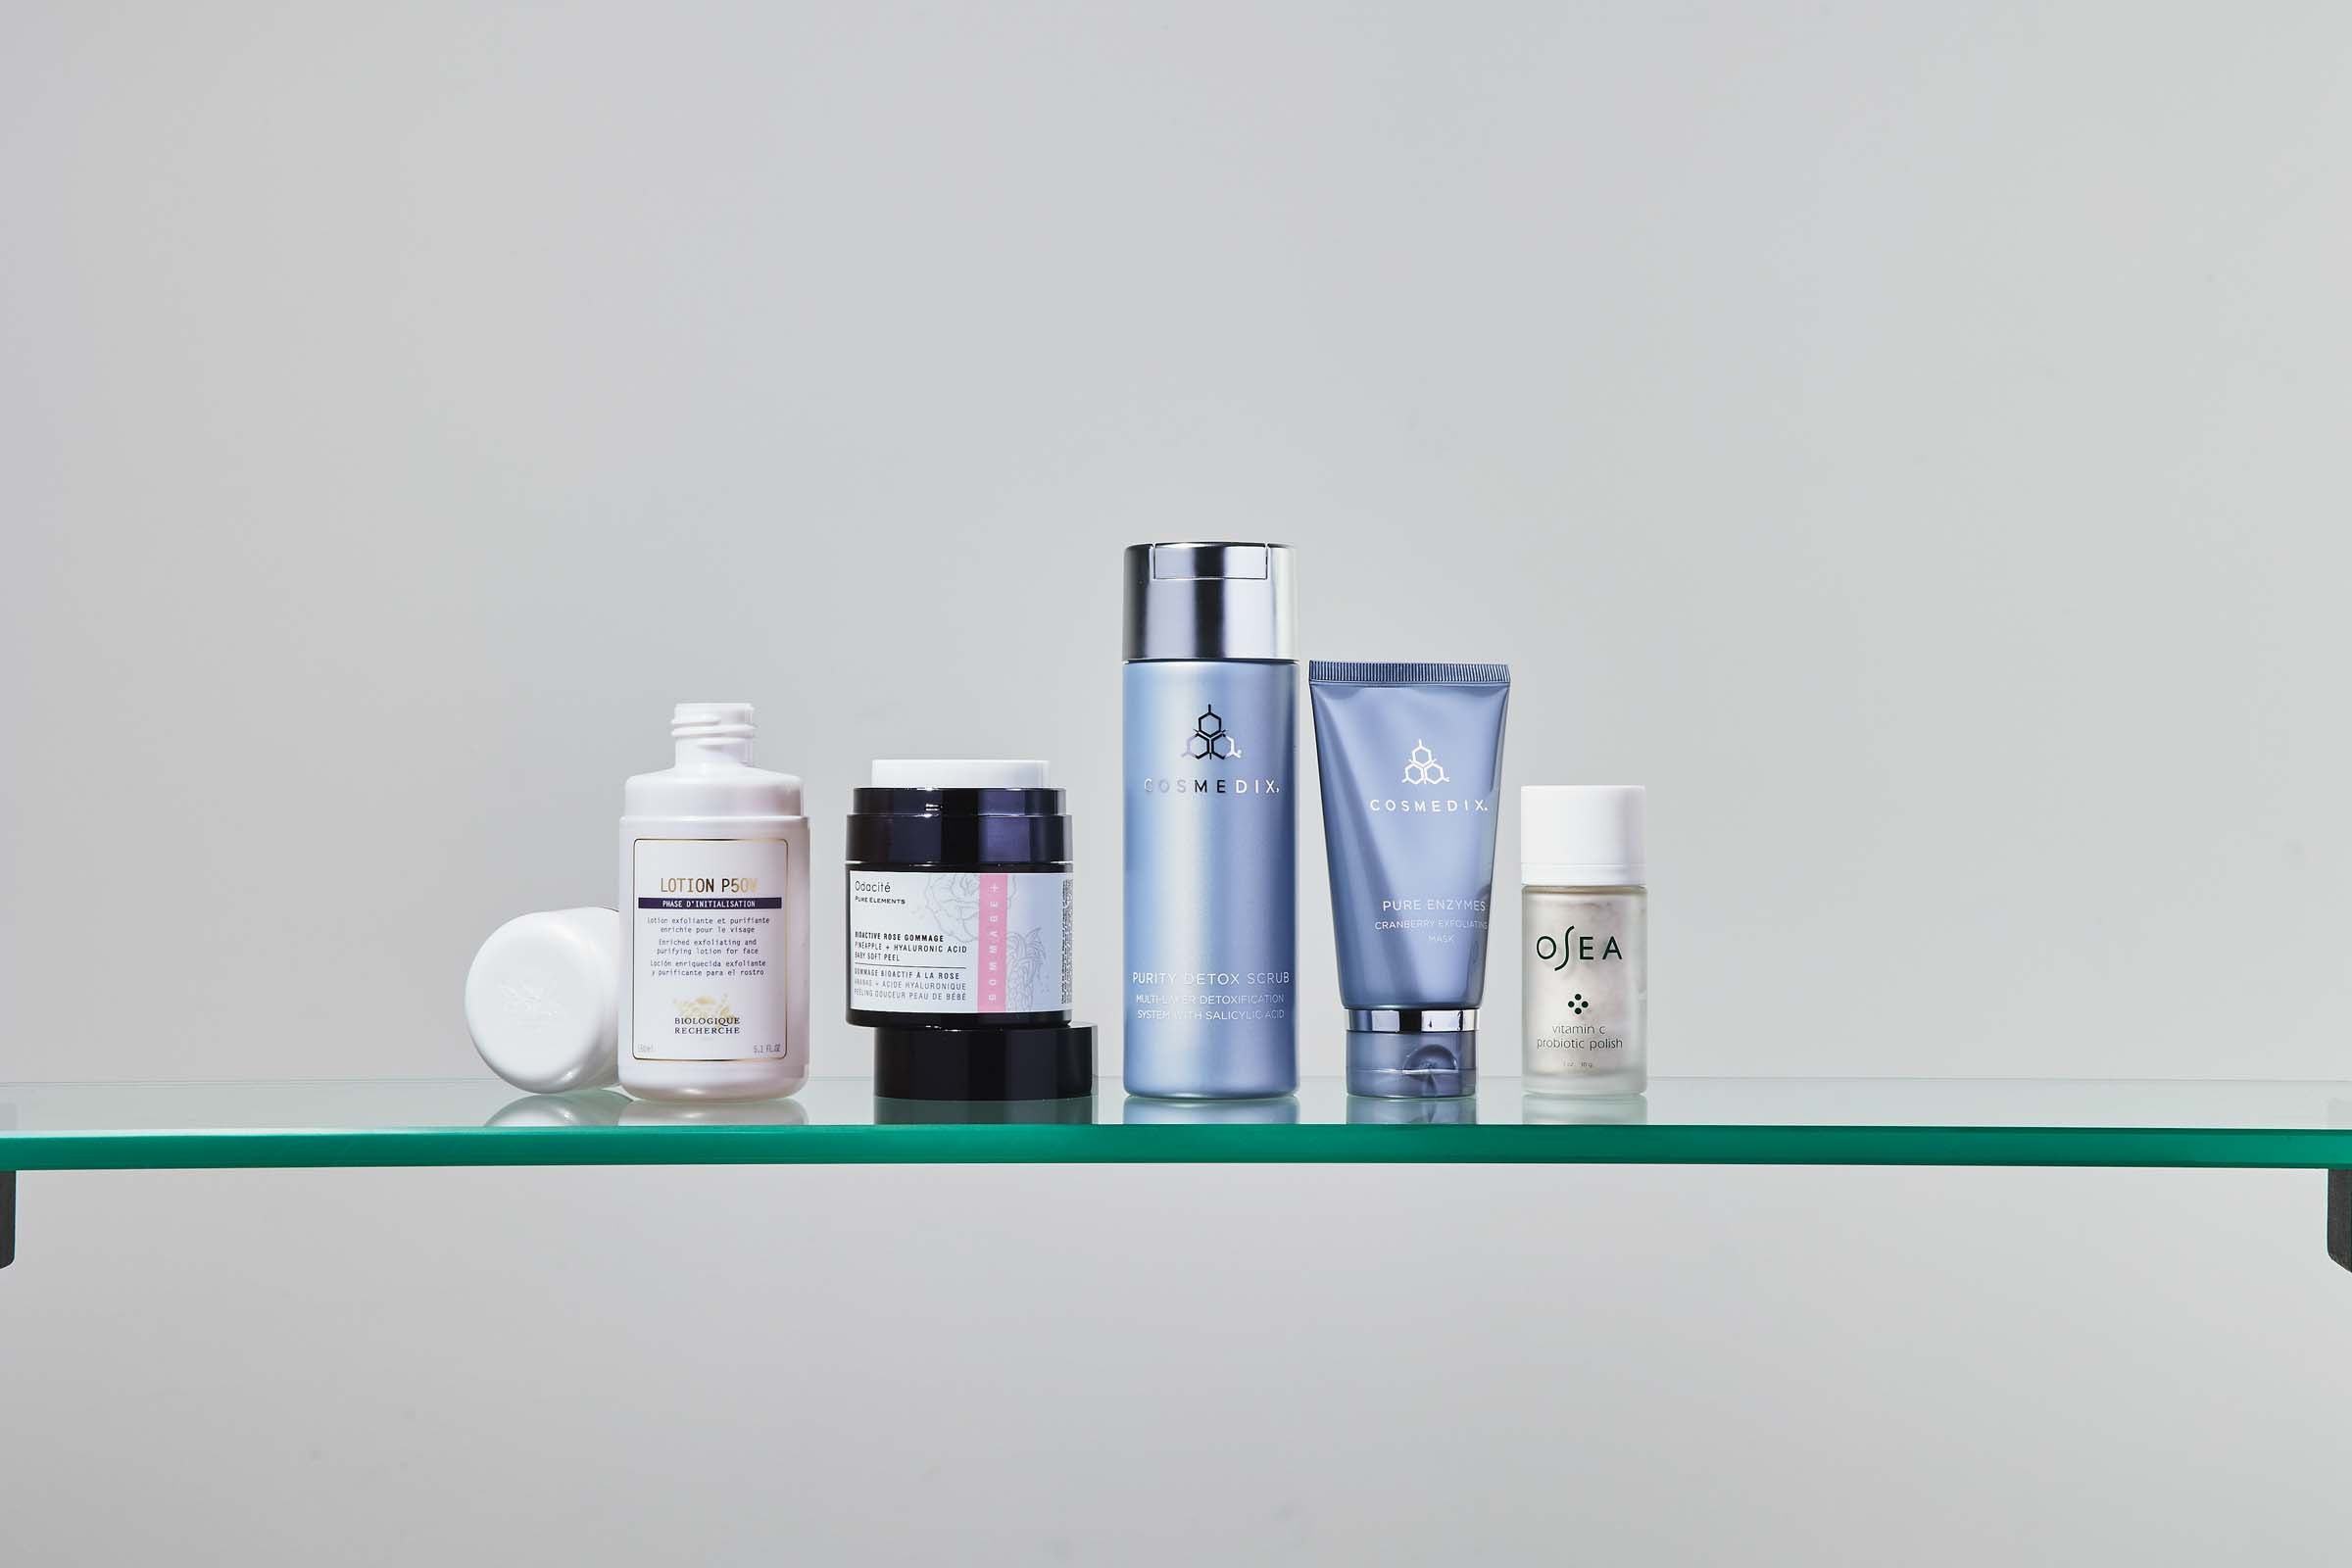 exfoliants and peels by cosmedix and odacite from skincare edit by melanie grant 